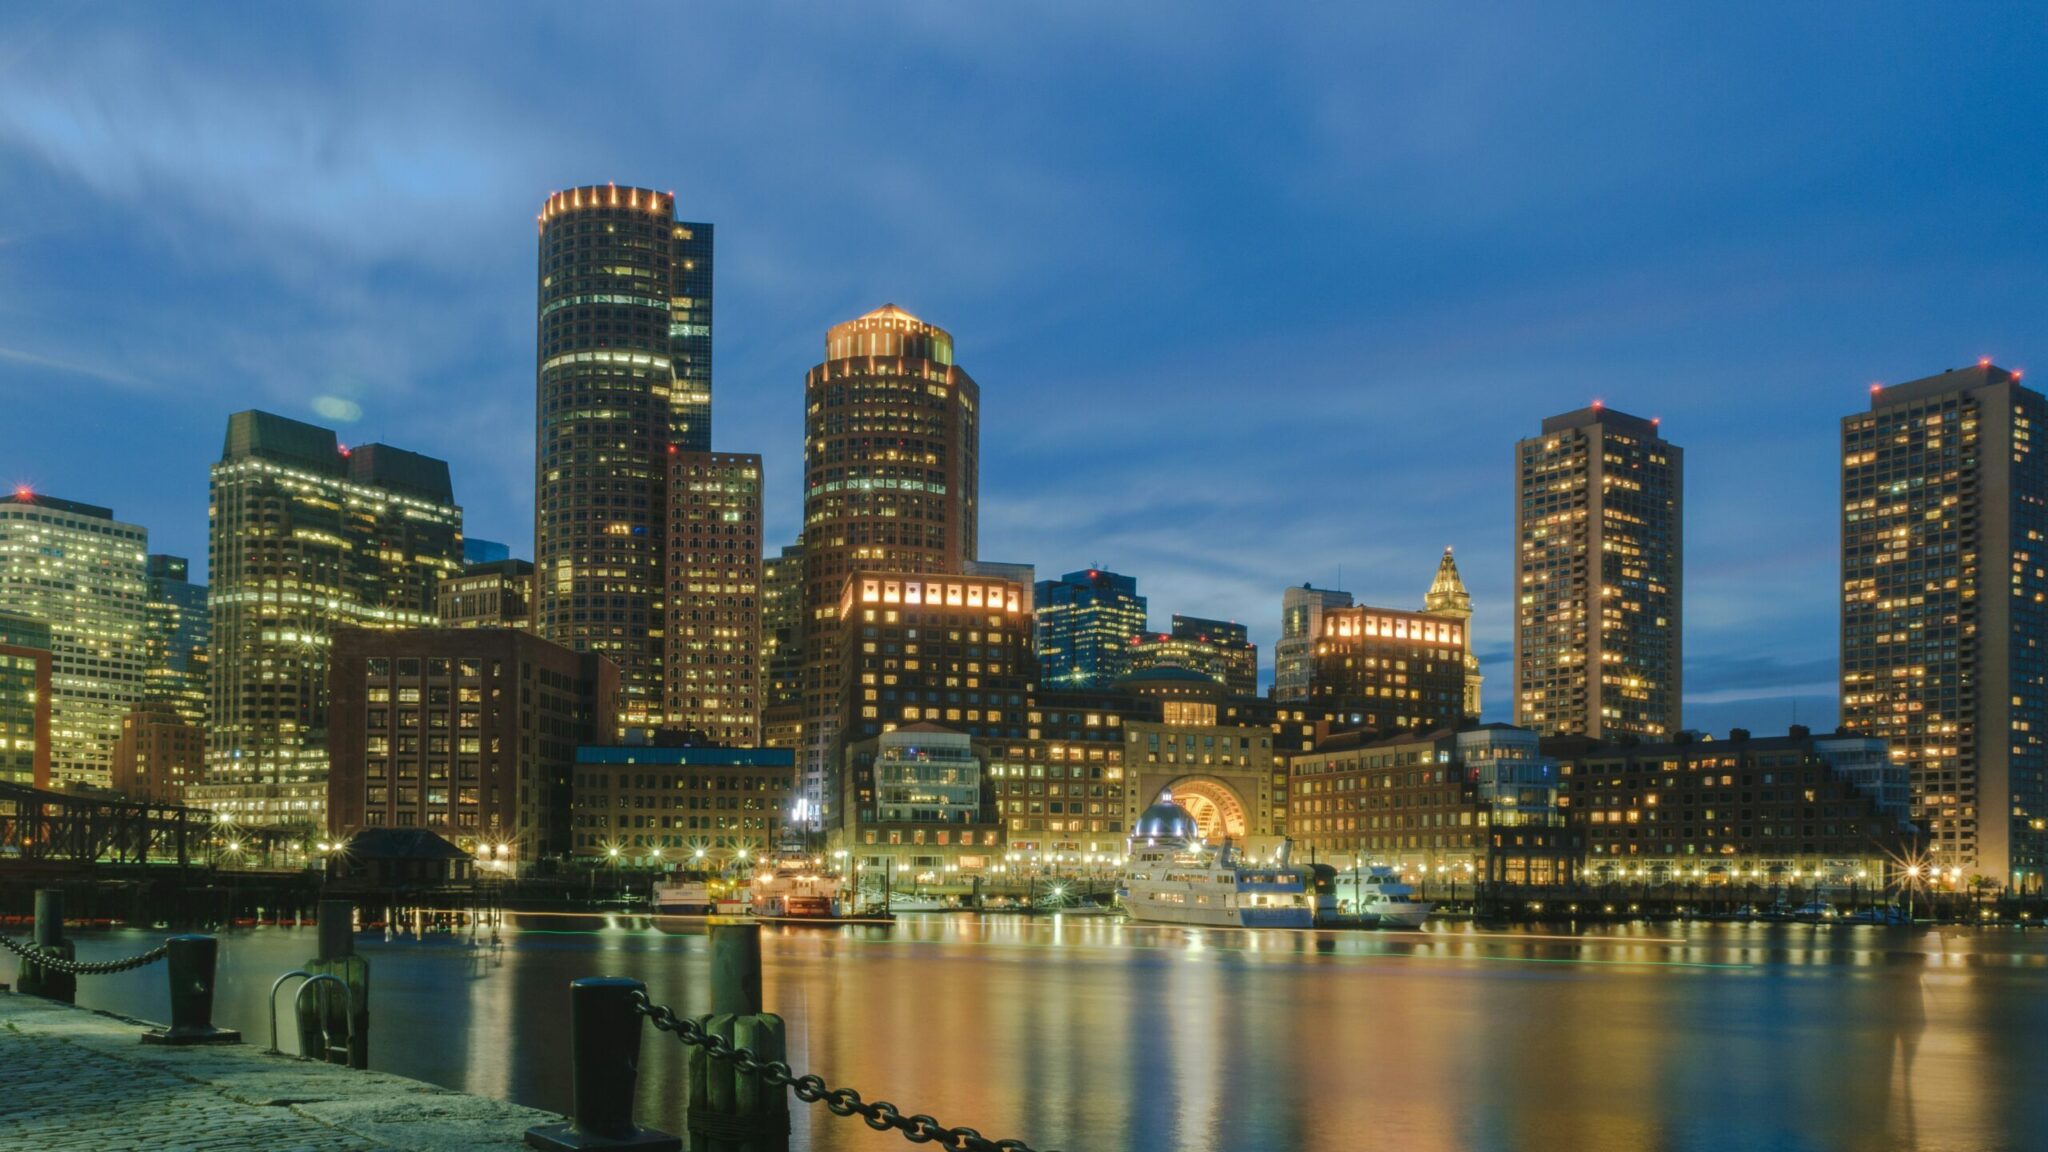 The Top 10 Things to Do in Boston